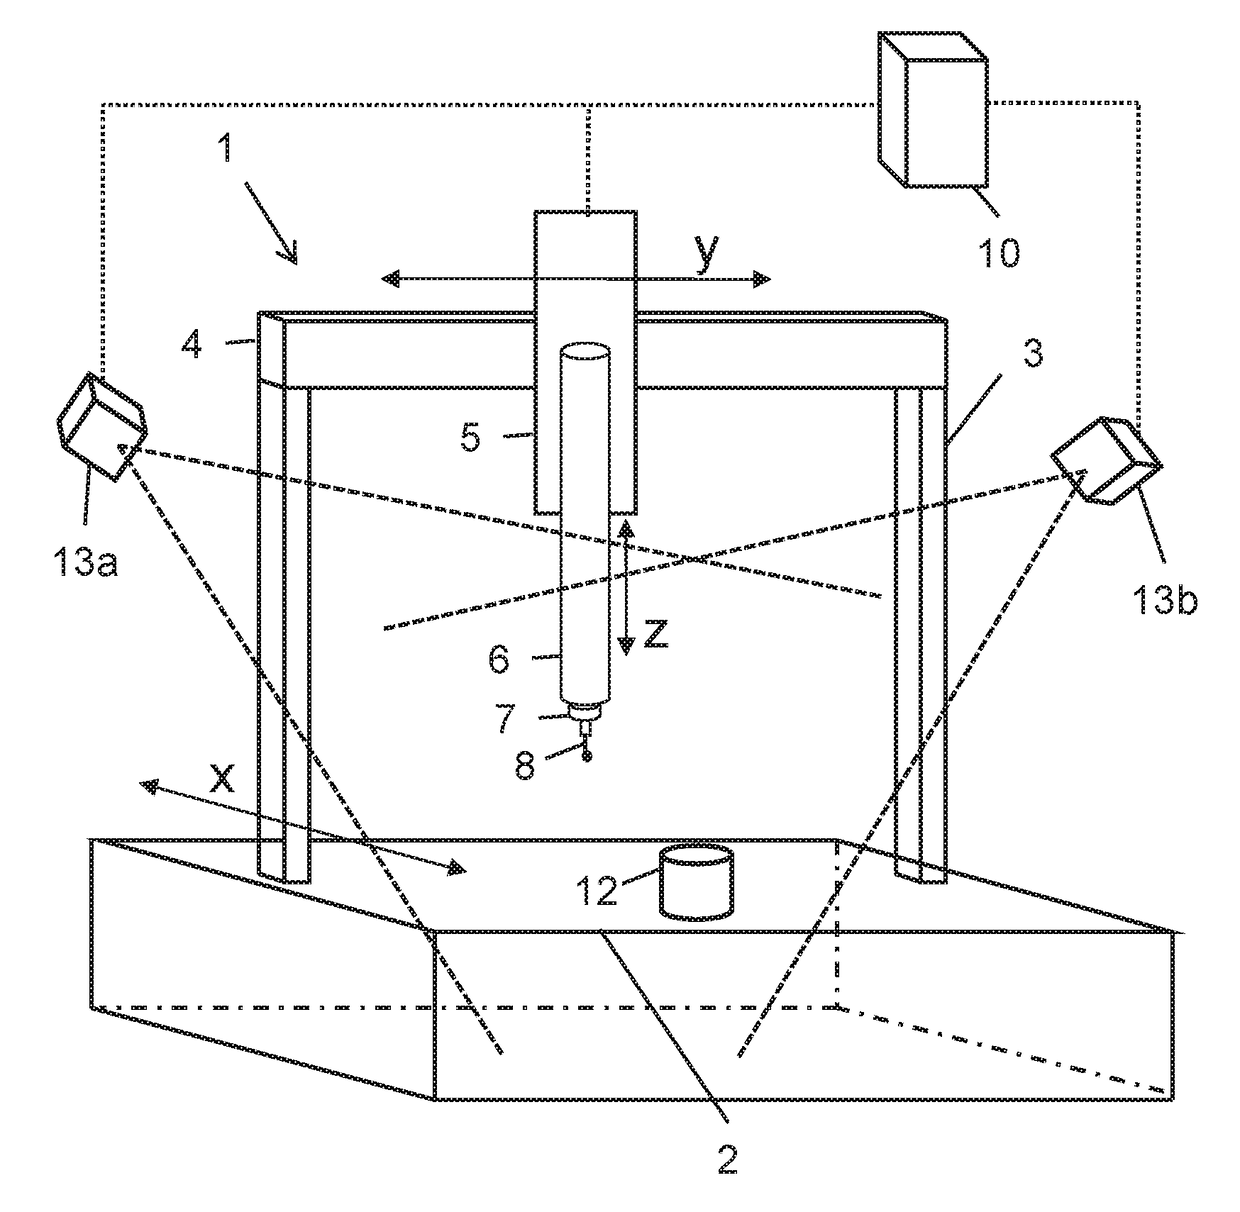 Motion-measuring system of a machine and method for operating the motion-measuring system